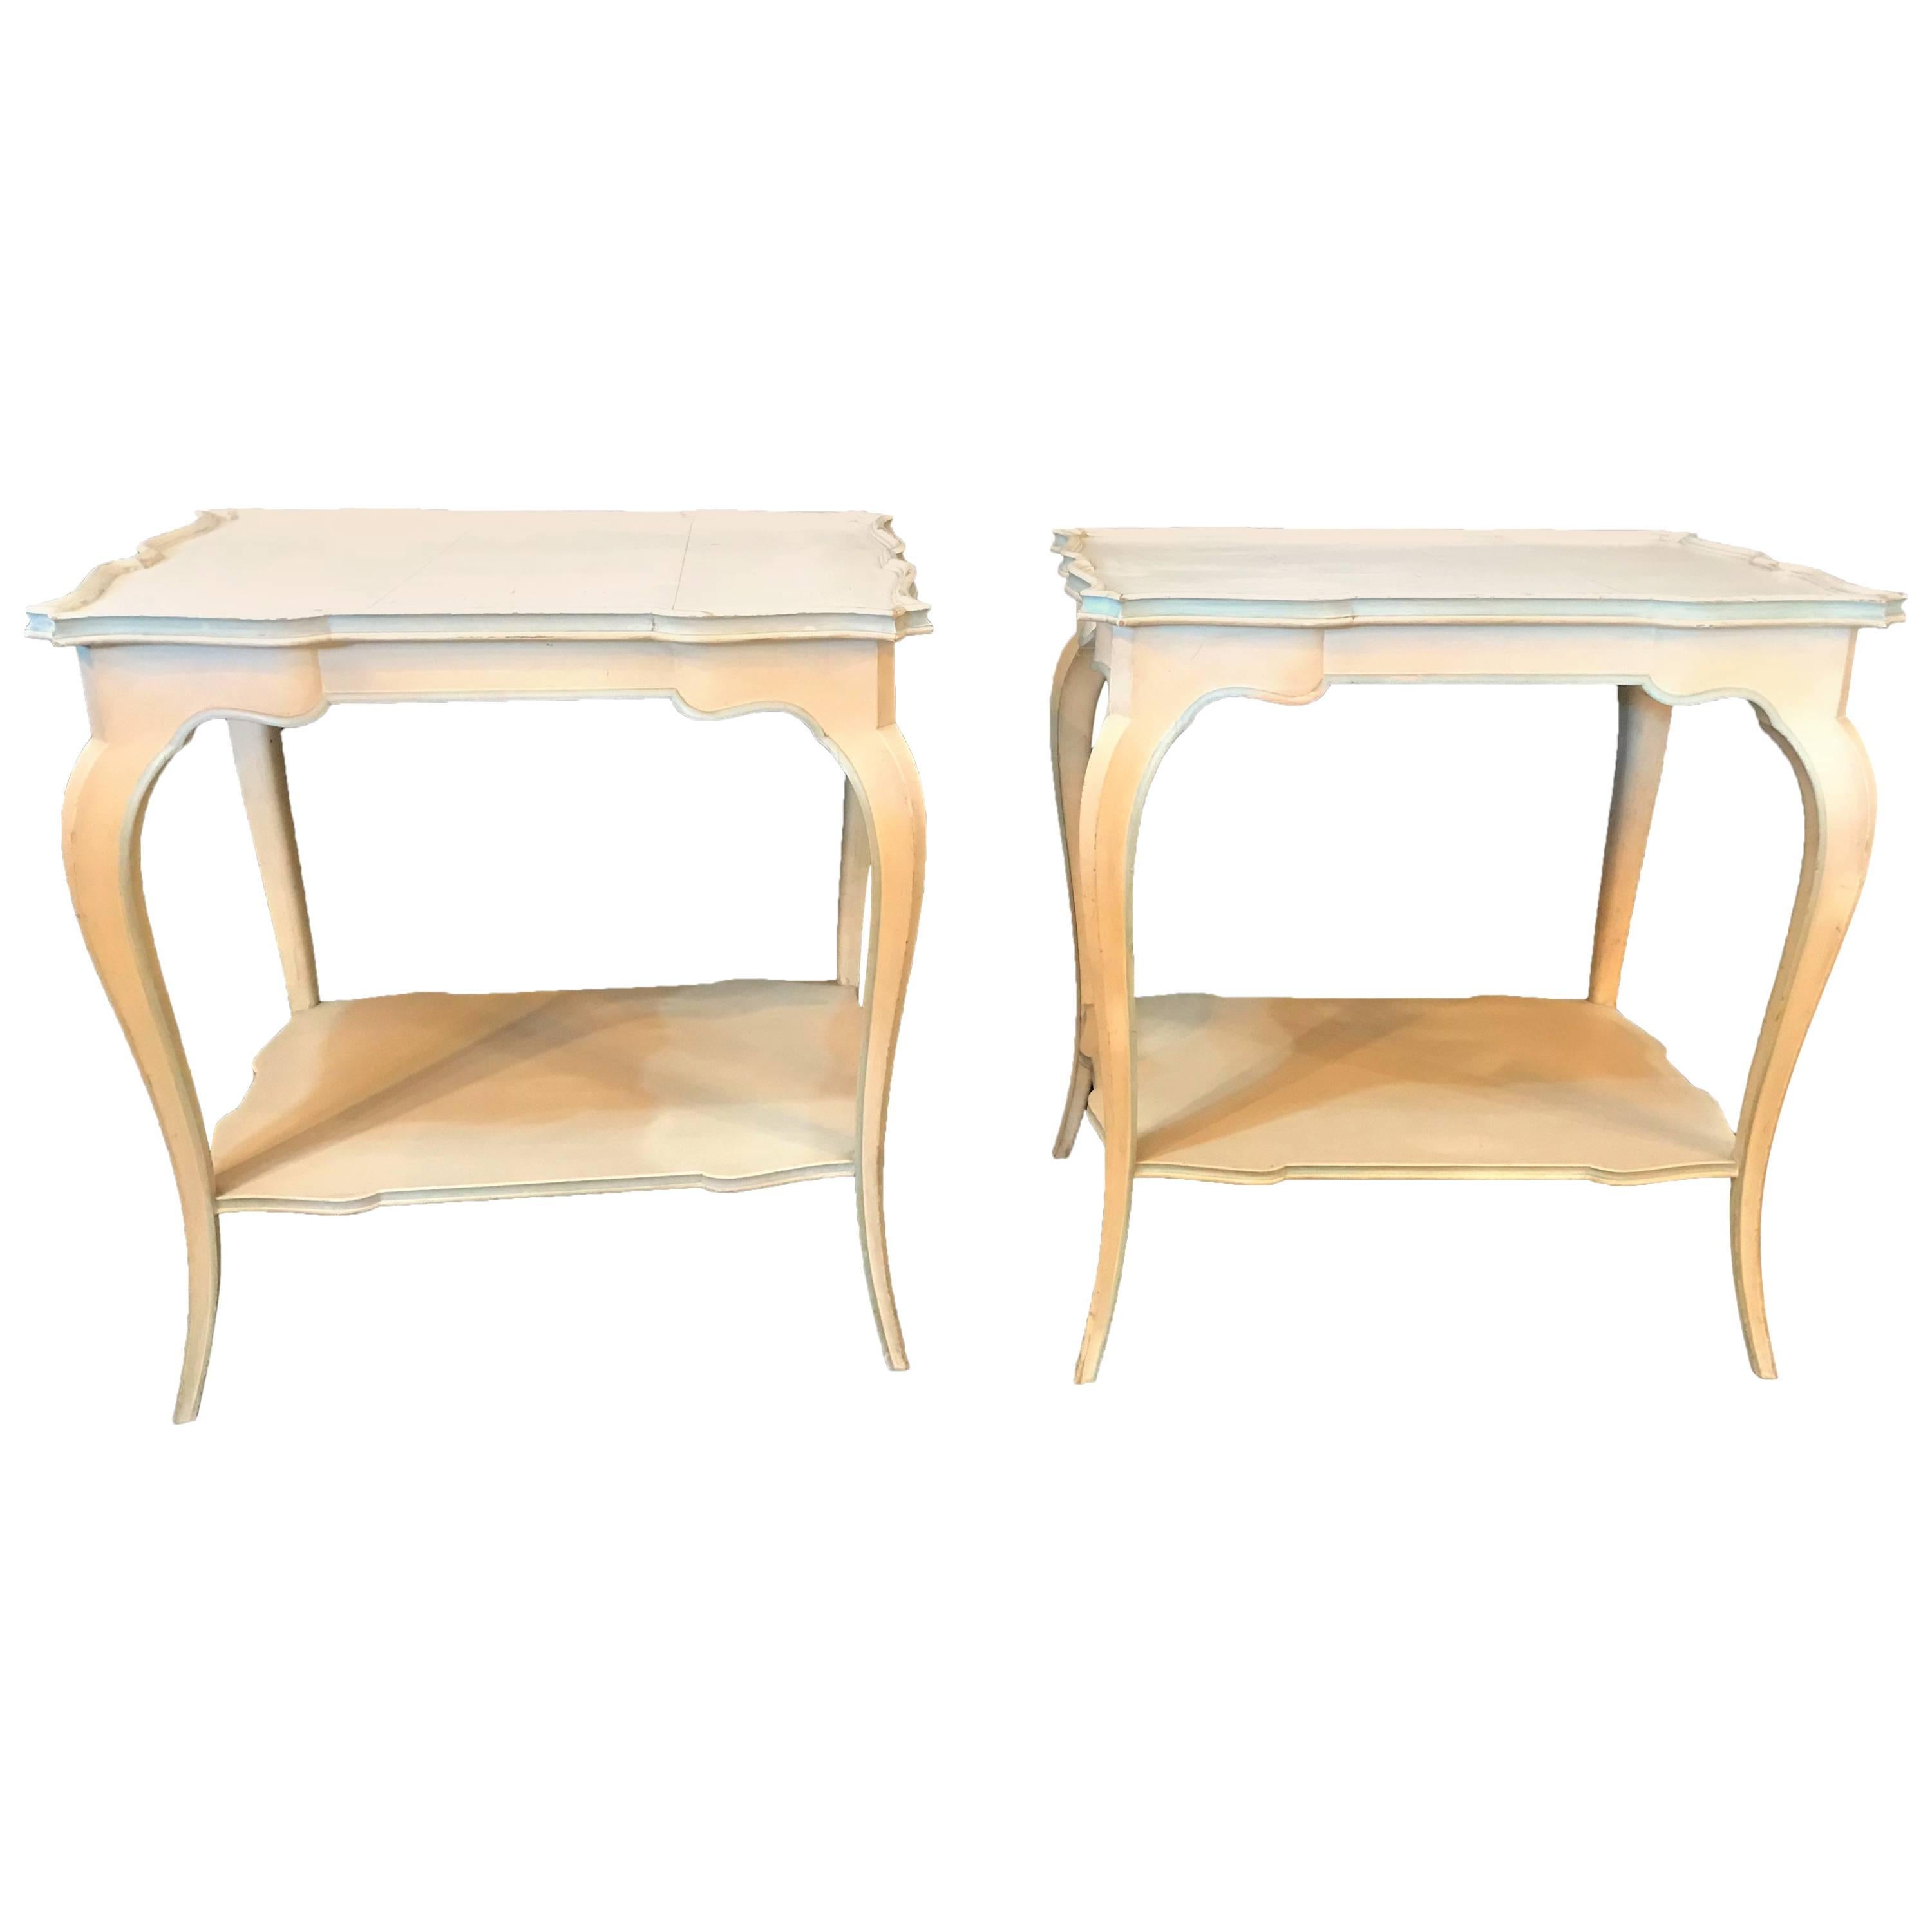 Pair of Distressed Paint Decorated Maison Jansen Side Tables or Night Tables